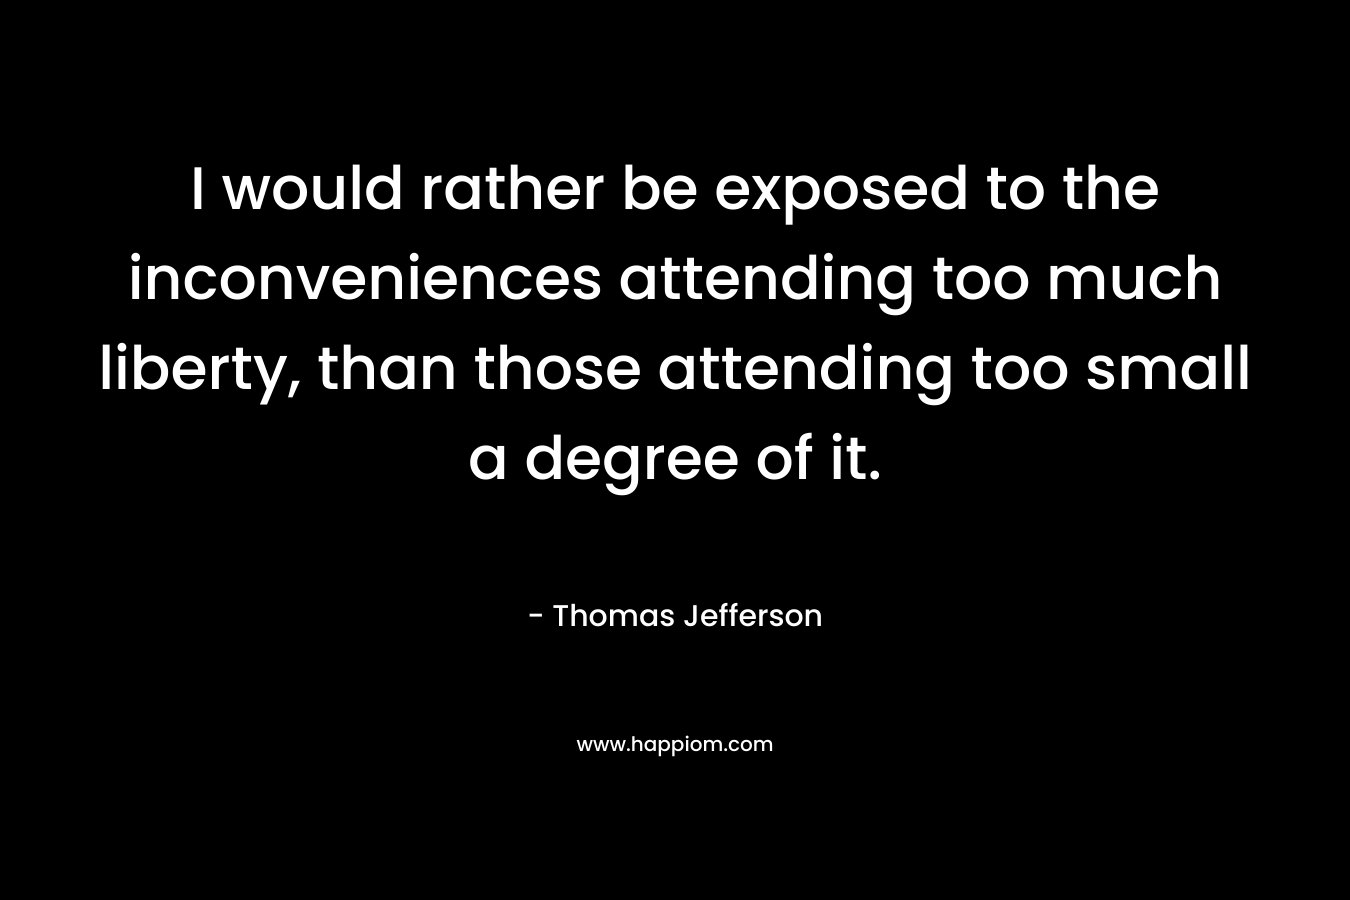 I would rather be exposed to the inconveniences attending too much liberty, than those attending too small a degree of it. – Thomas Jefferson